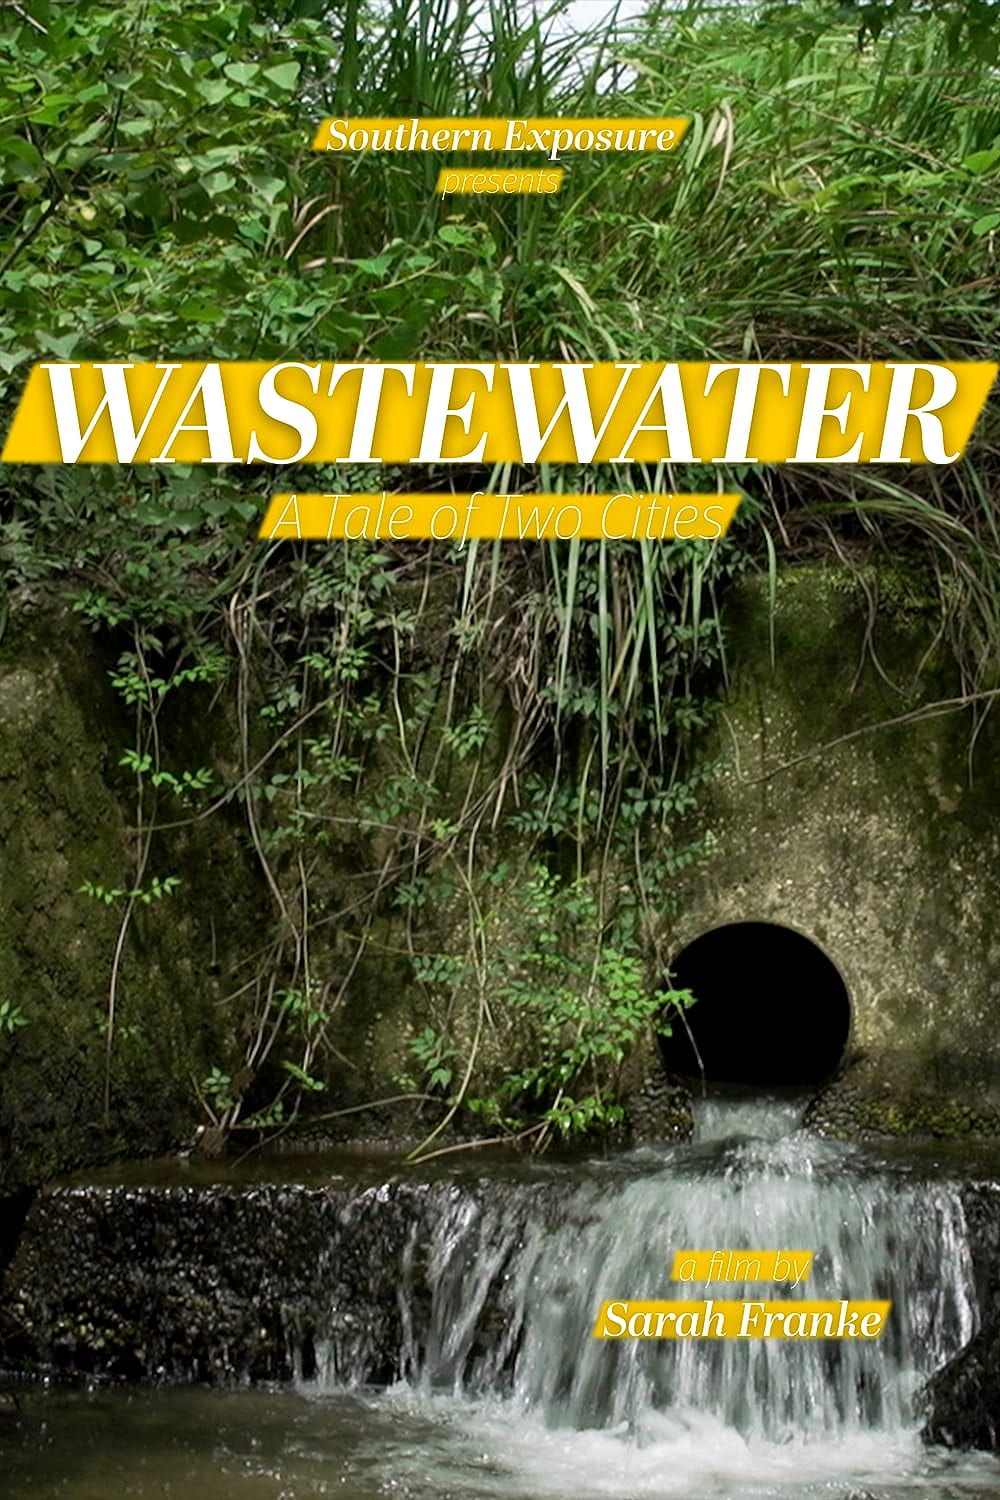 Stormwater outfall from "Wastewater: A Tale of Two Cities"